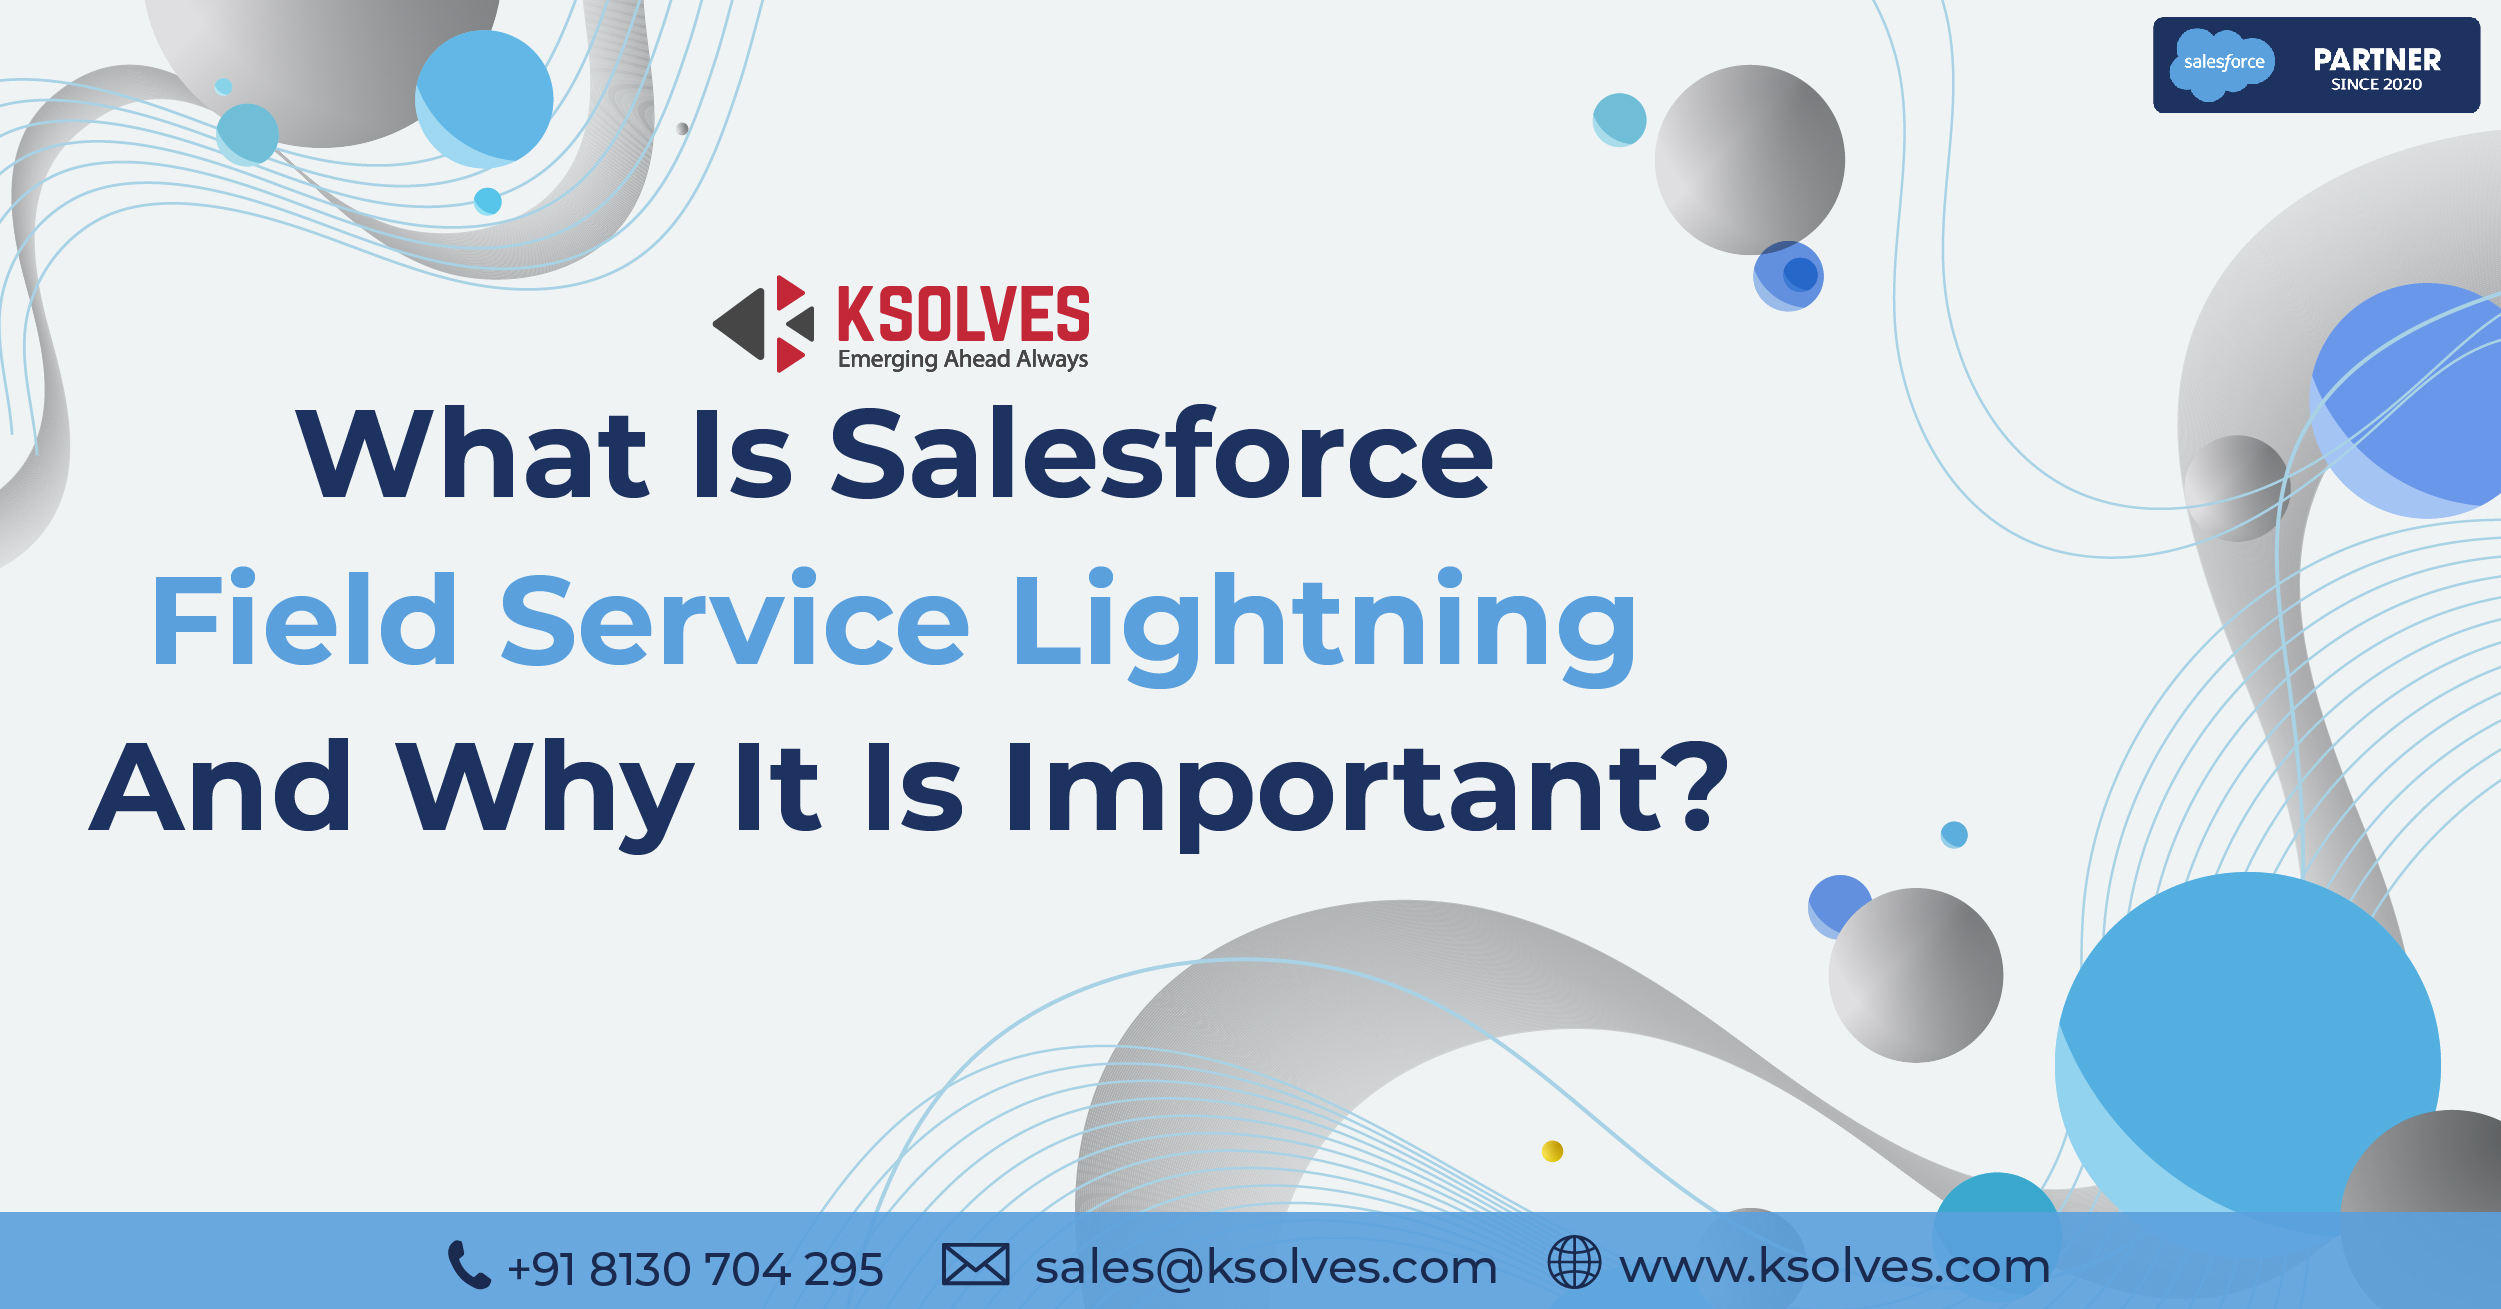 What Is Salesforce Field Service Lightning And Why It Is Important?